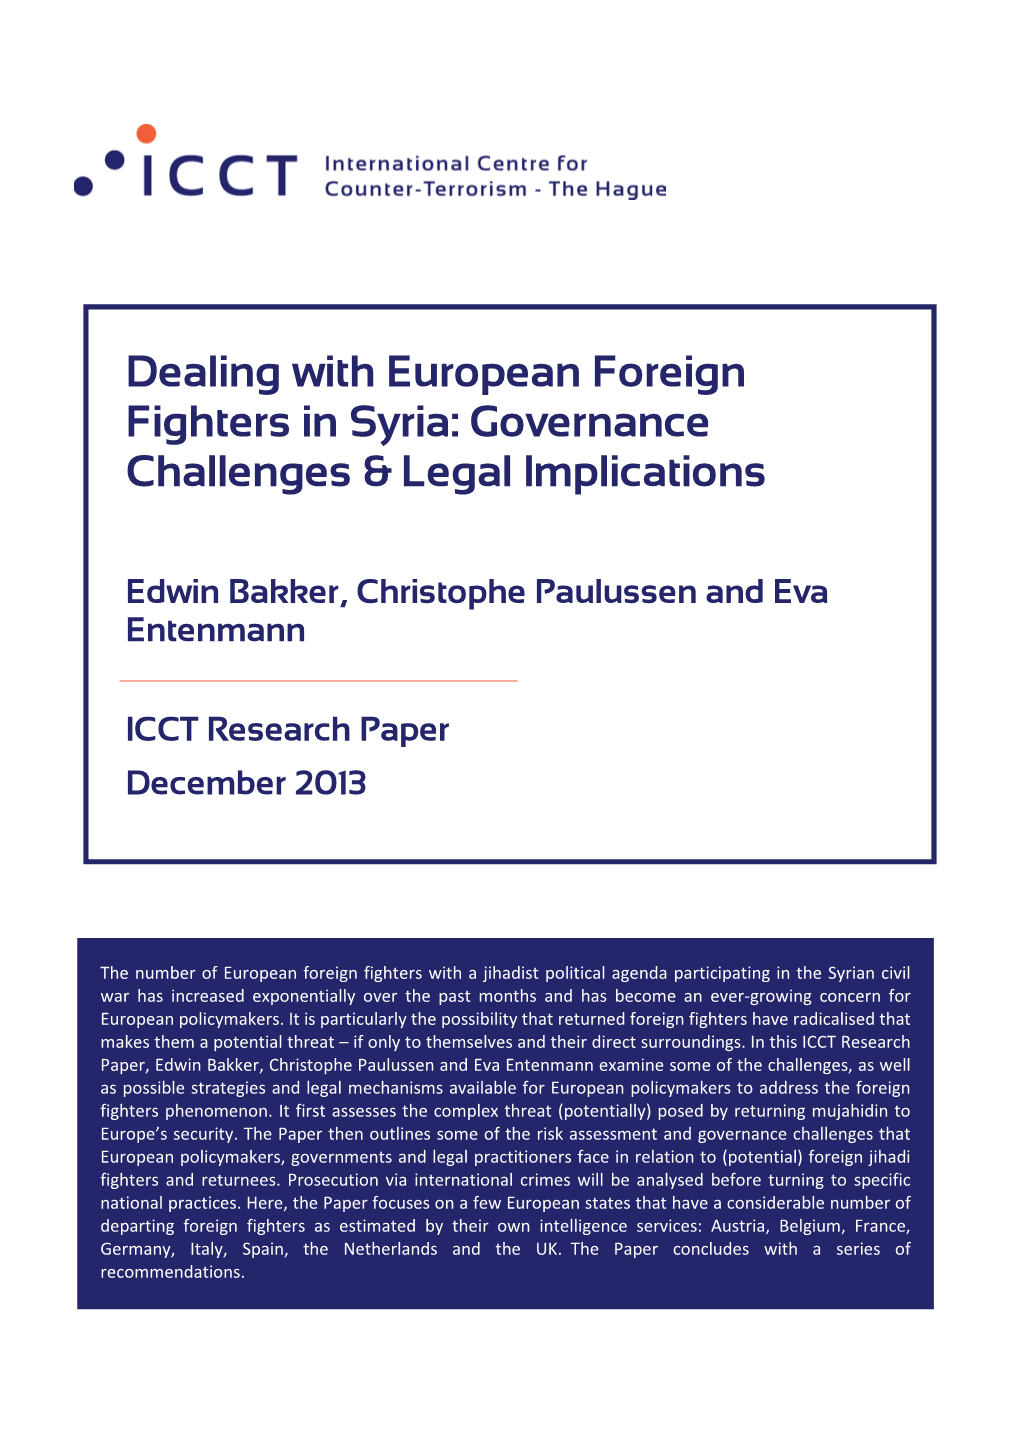 Dealing with European Foreign Fighters in Syria: Governance Challenges & Legal Implications